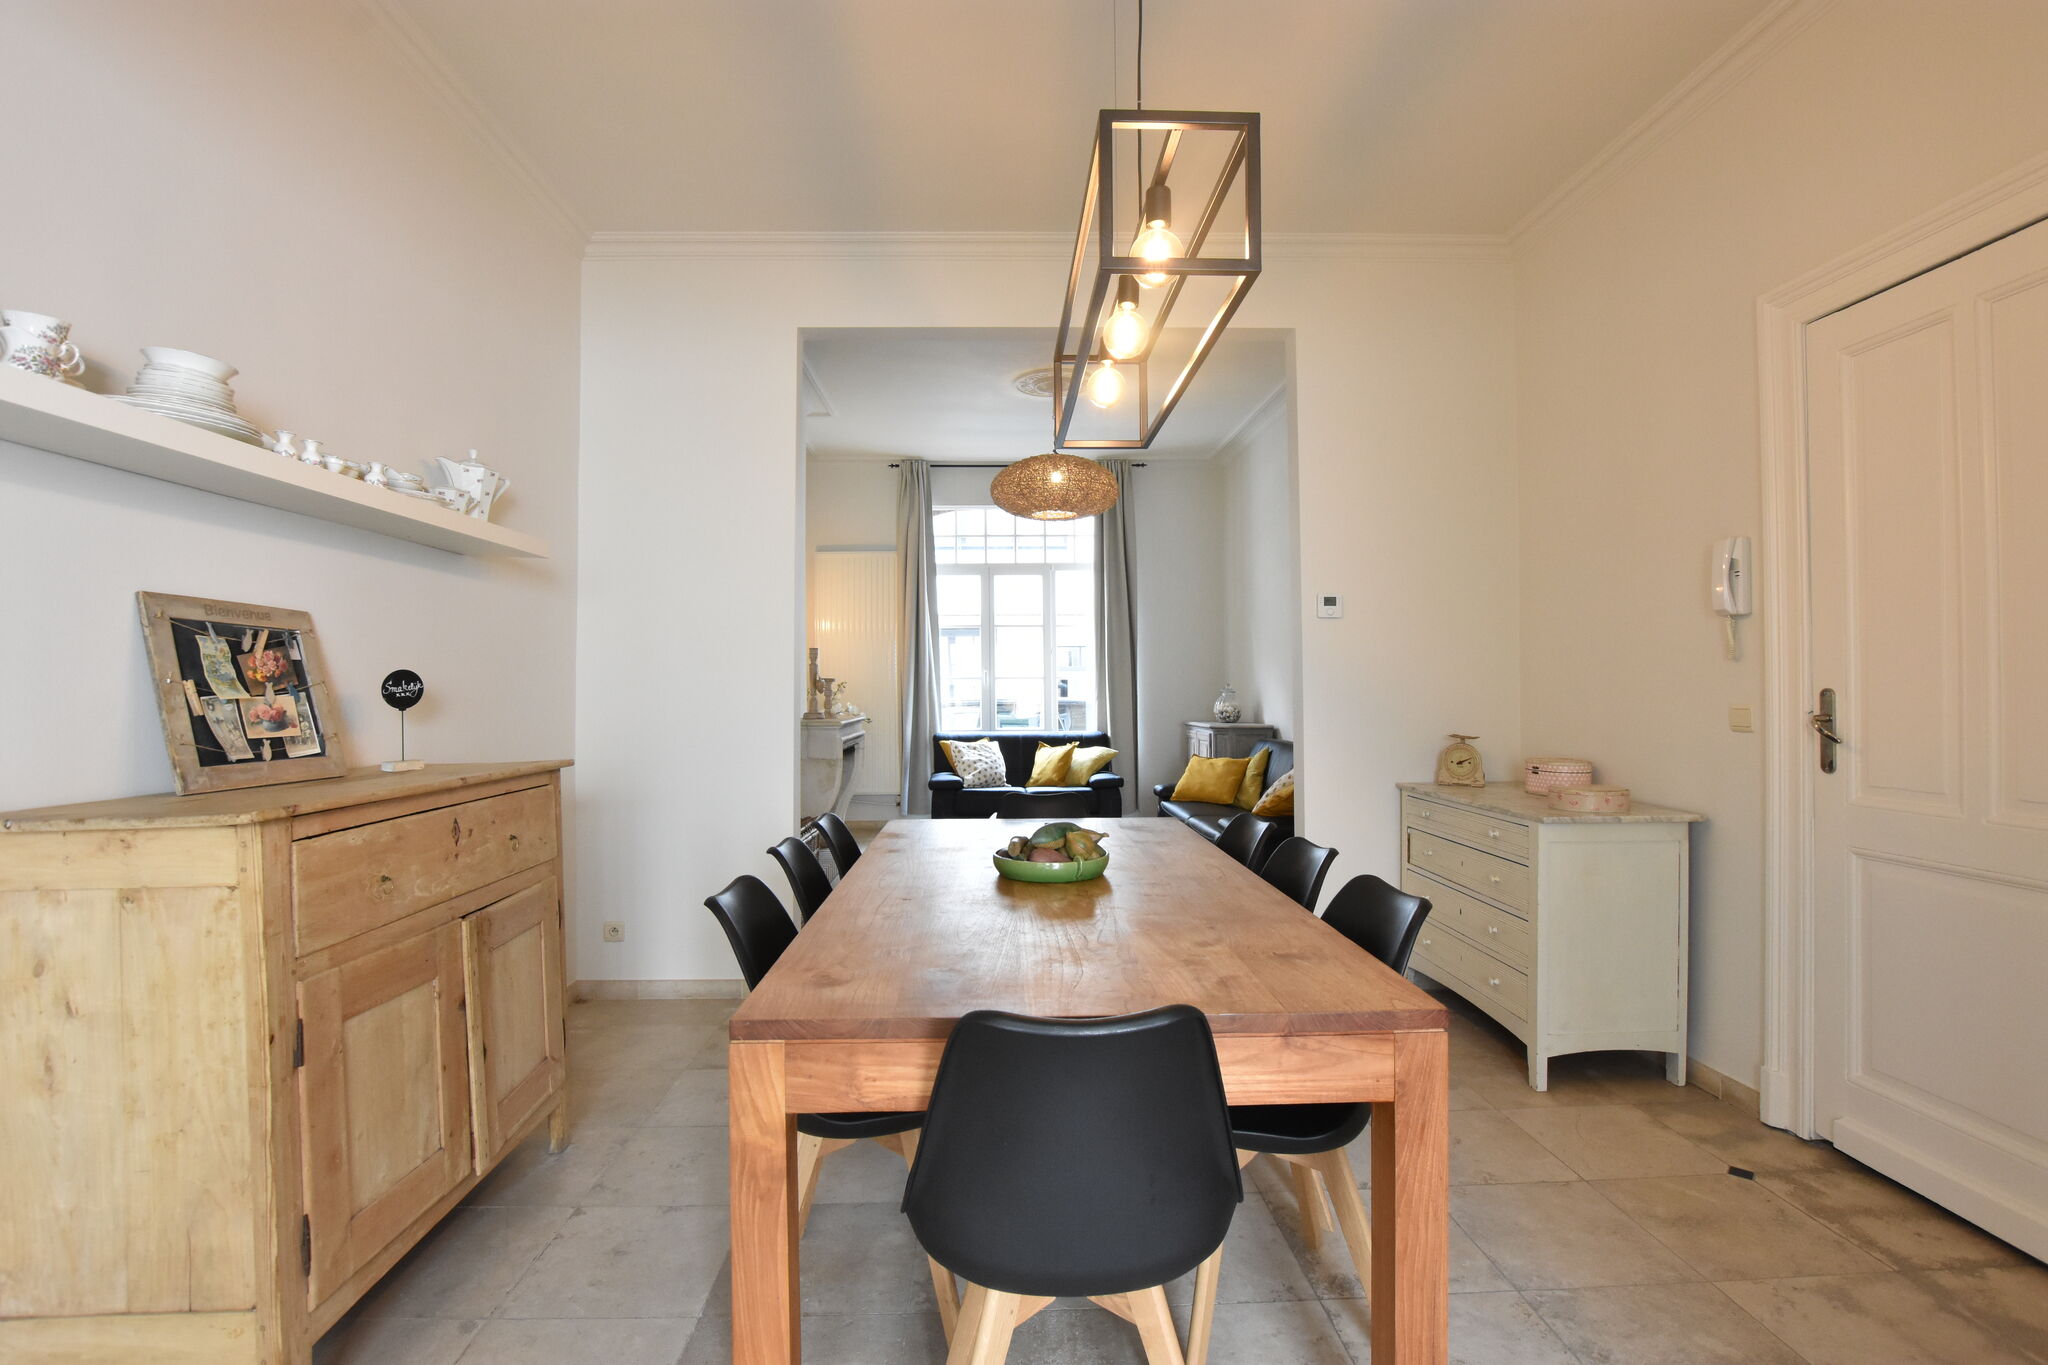 This old town house has been completely renovated